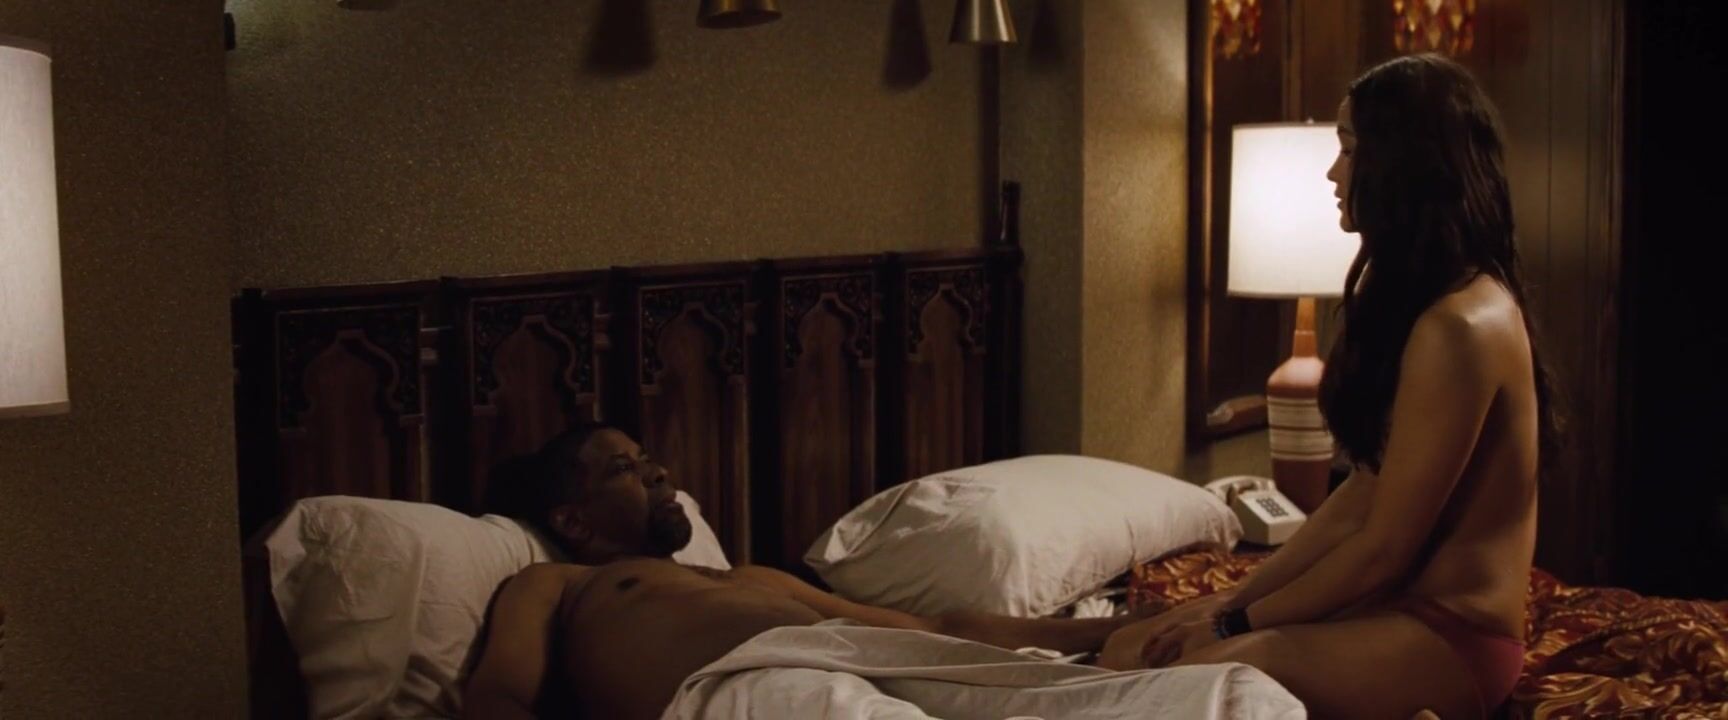 Handsome Paula Patton manages to excite black man during the naked moment from 2 Guns movie Caliente